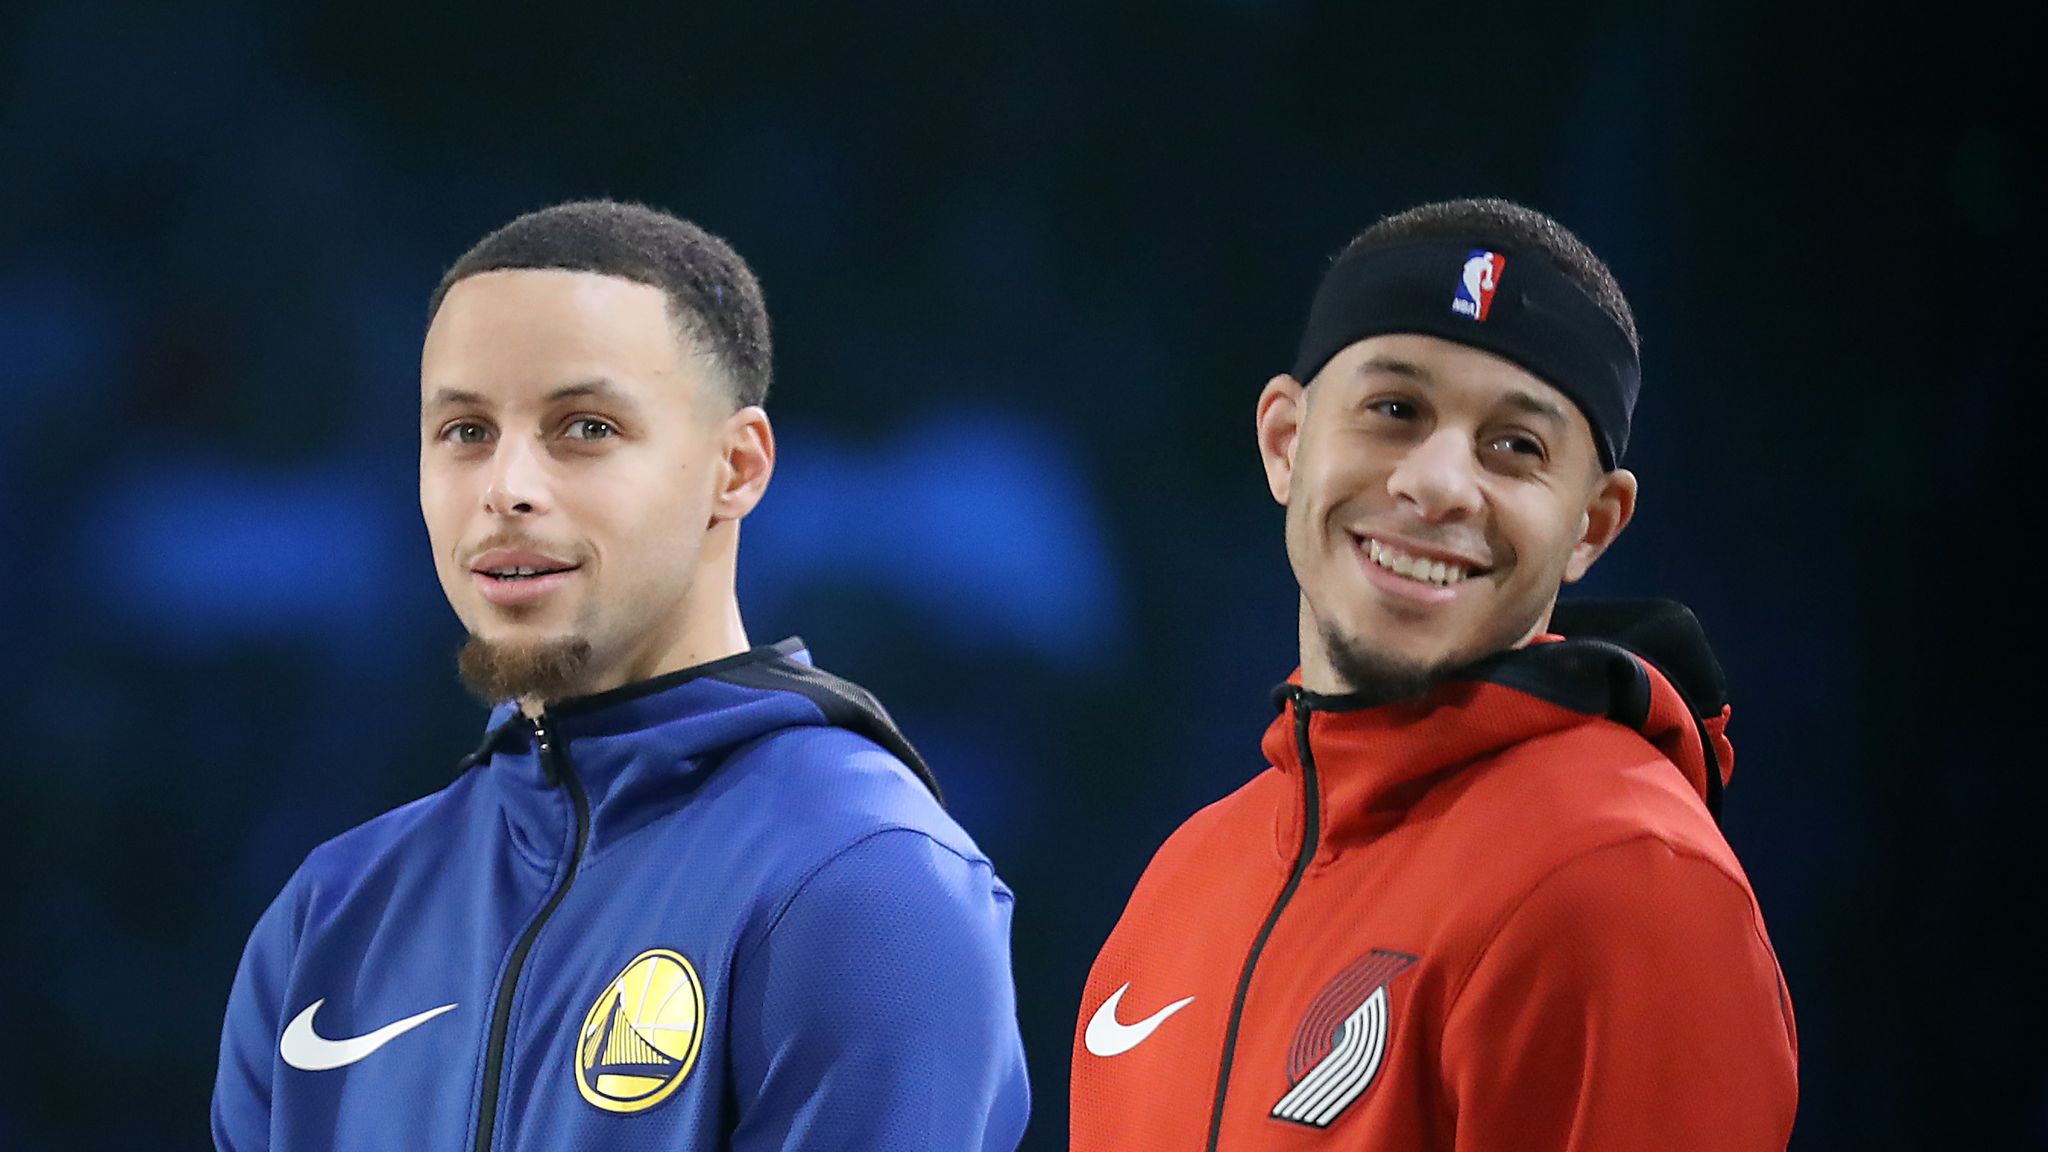 Coin flip to decide who mom, dad root for in Seth vs. Steph matchup